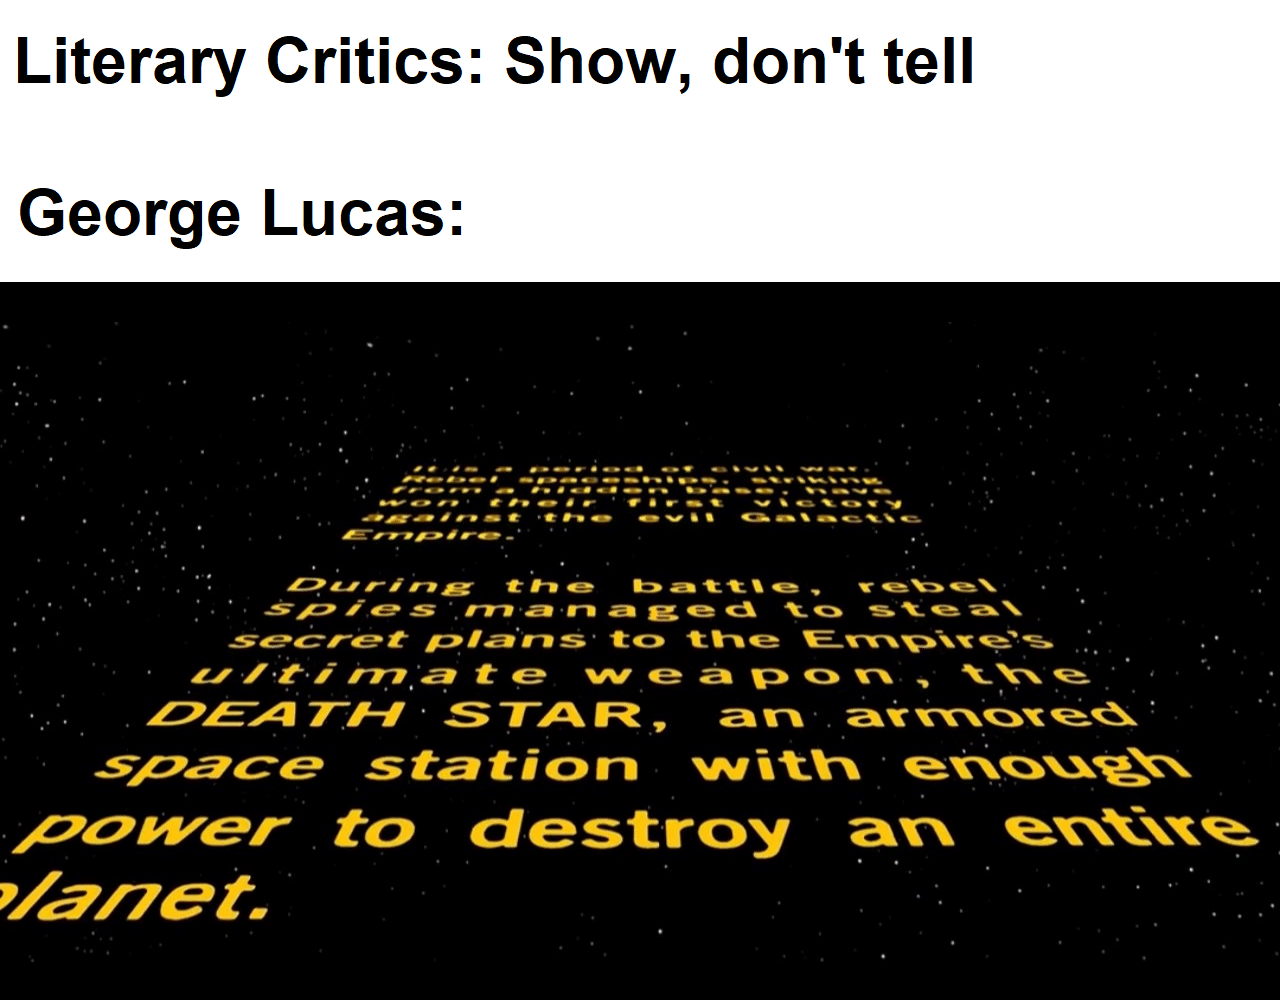 star-wars star-wars-memes star-wars text: Literary Critics: Show, don't tell George Lucas: see—ret DEZ.4TÆ-' STAR, space station power to destroy an '/anet- 